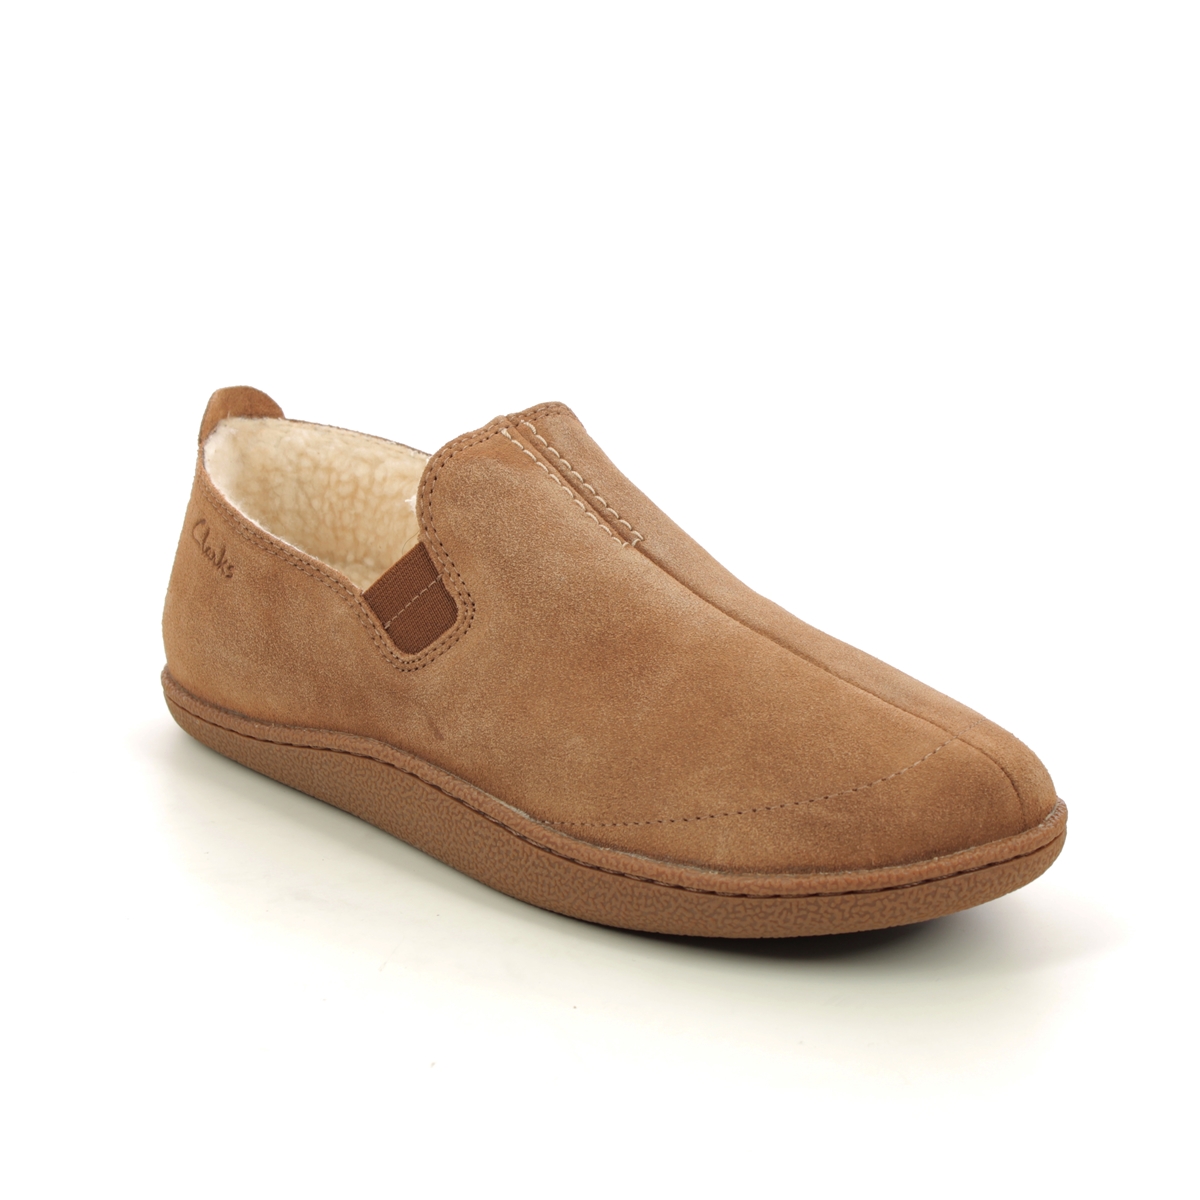 Clarks Home Moccasin Cheer Fit Tan suede slippers